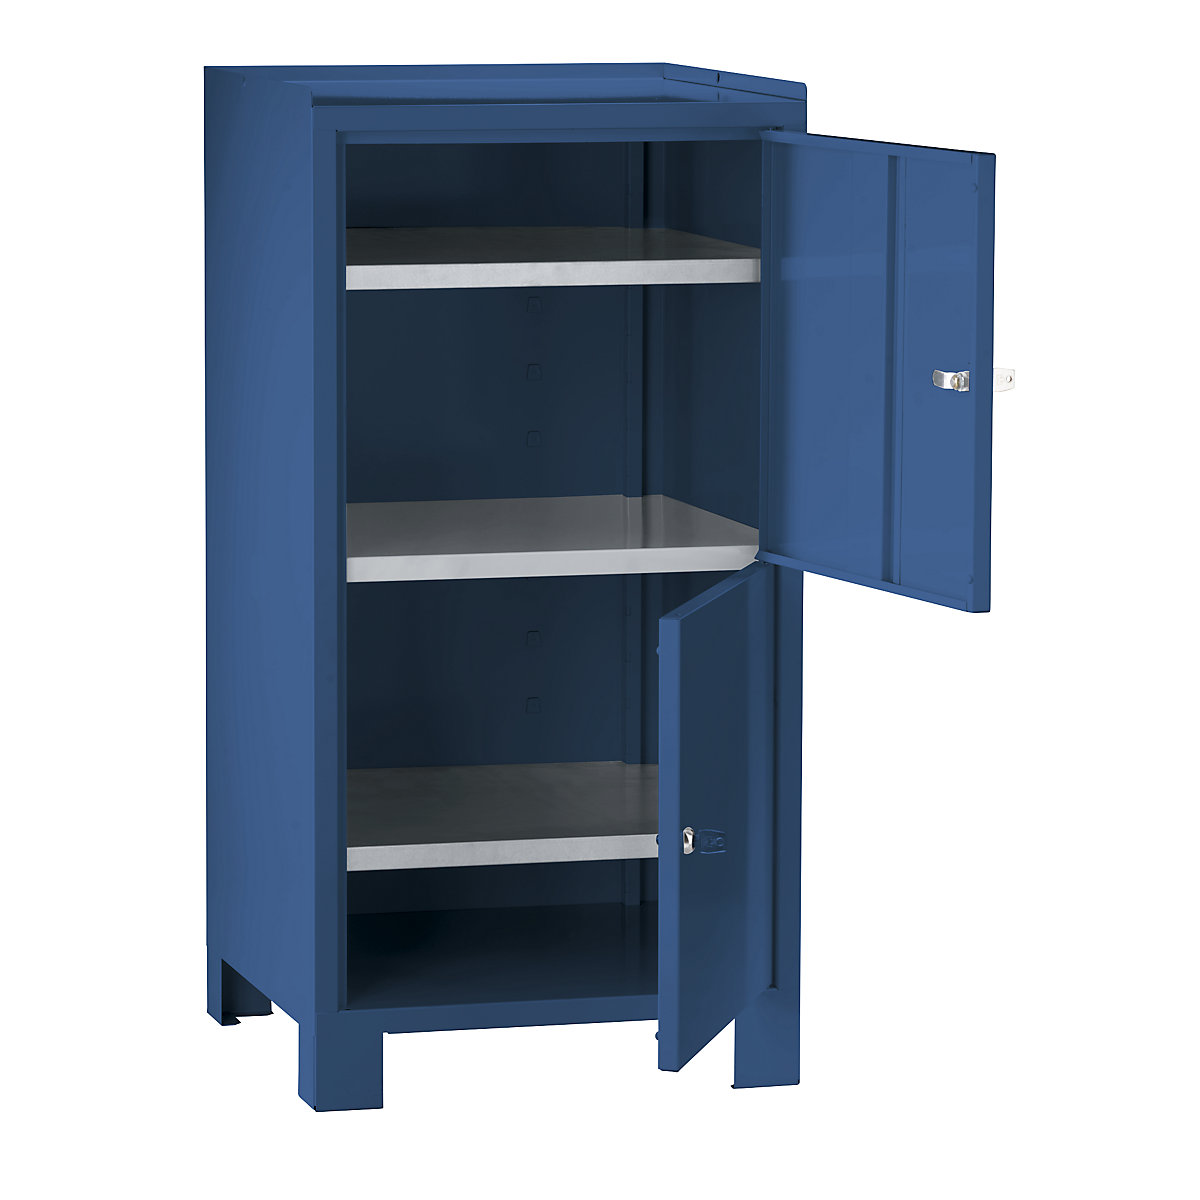 Tool cupboard with feet – Wolf, HxWxD 1000 x 500 x 500 mm, 2 lockable compartments with 1 shelf each, brilliant blue RAL 5007-11